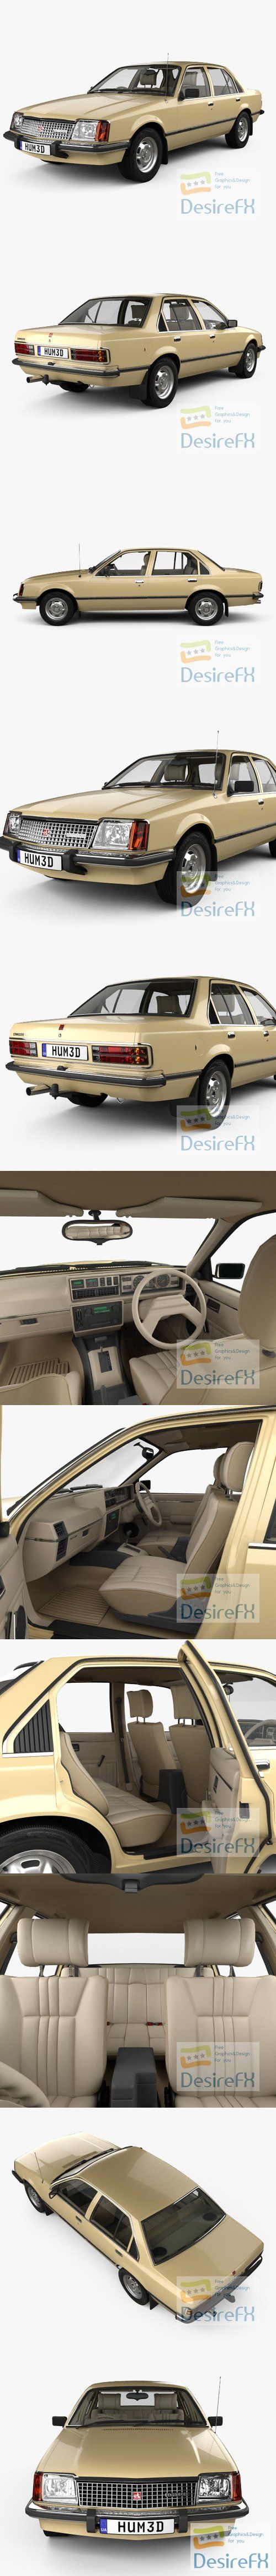 Holden Commodore with HQ interior 1980 3D Model